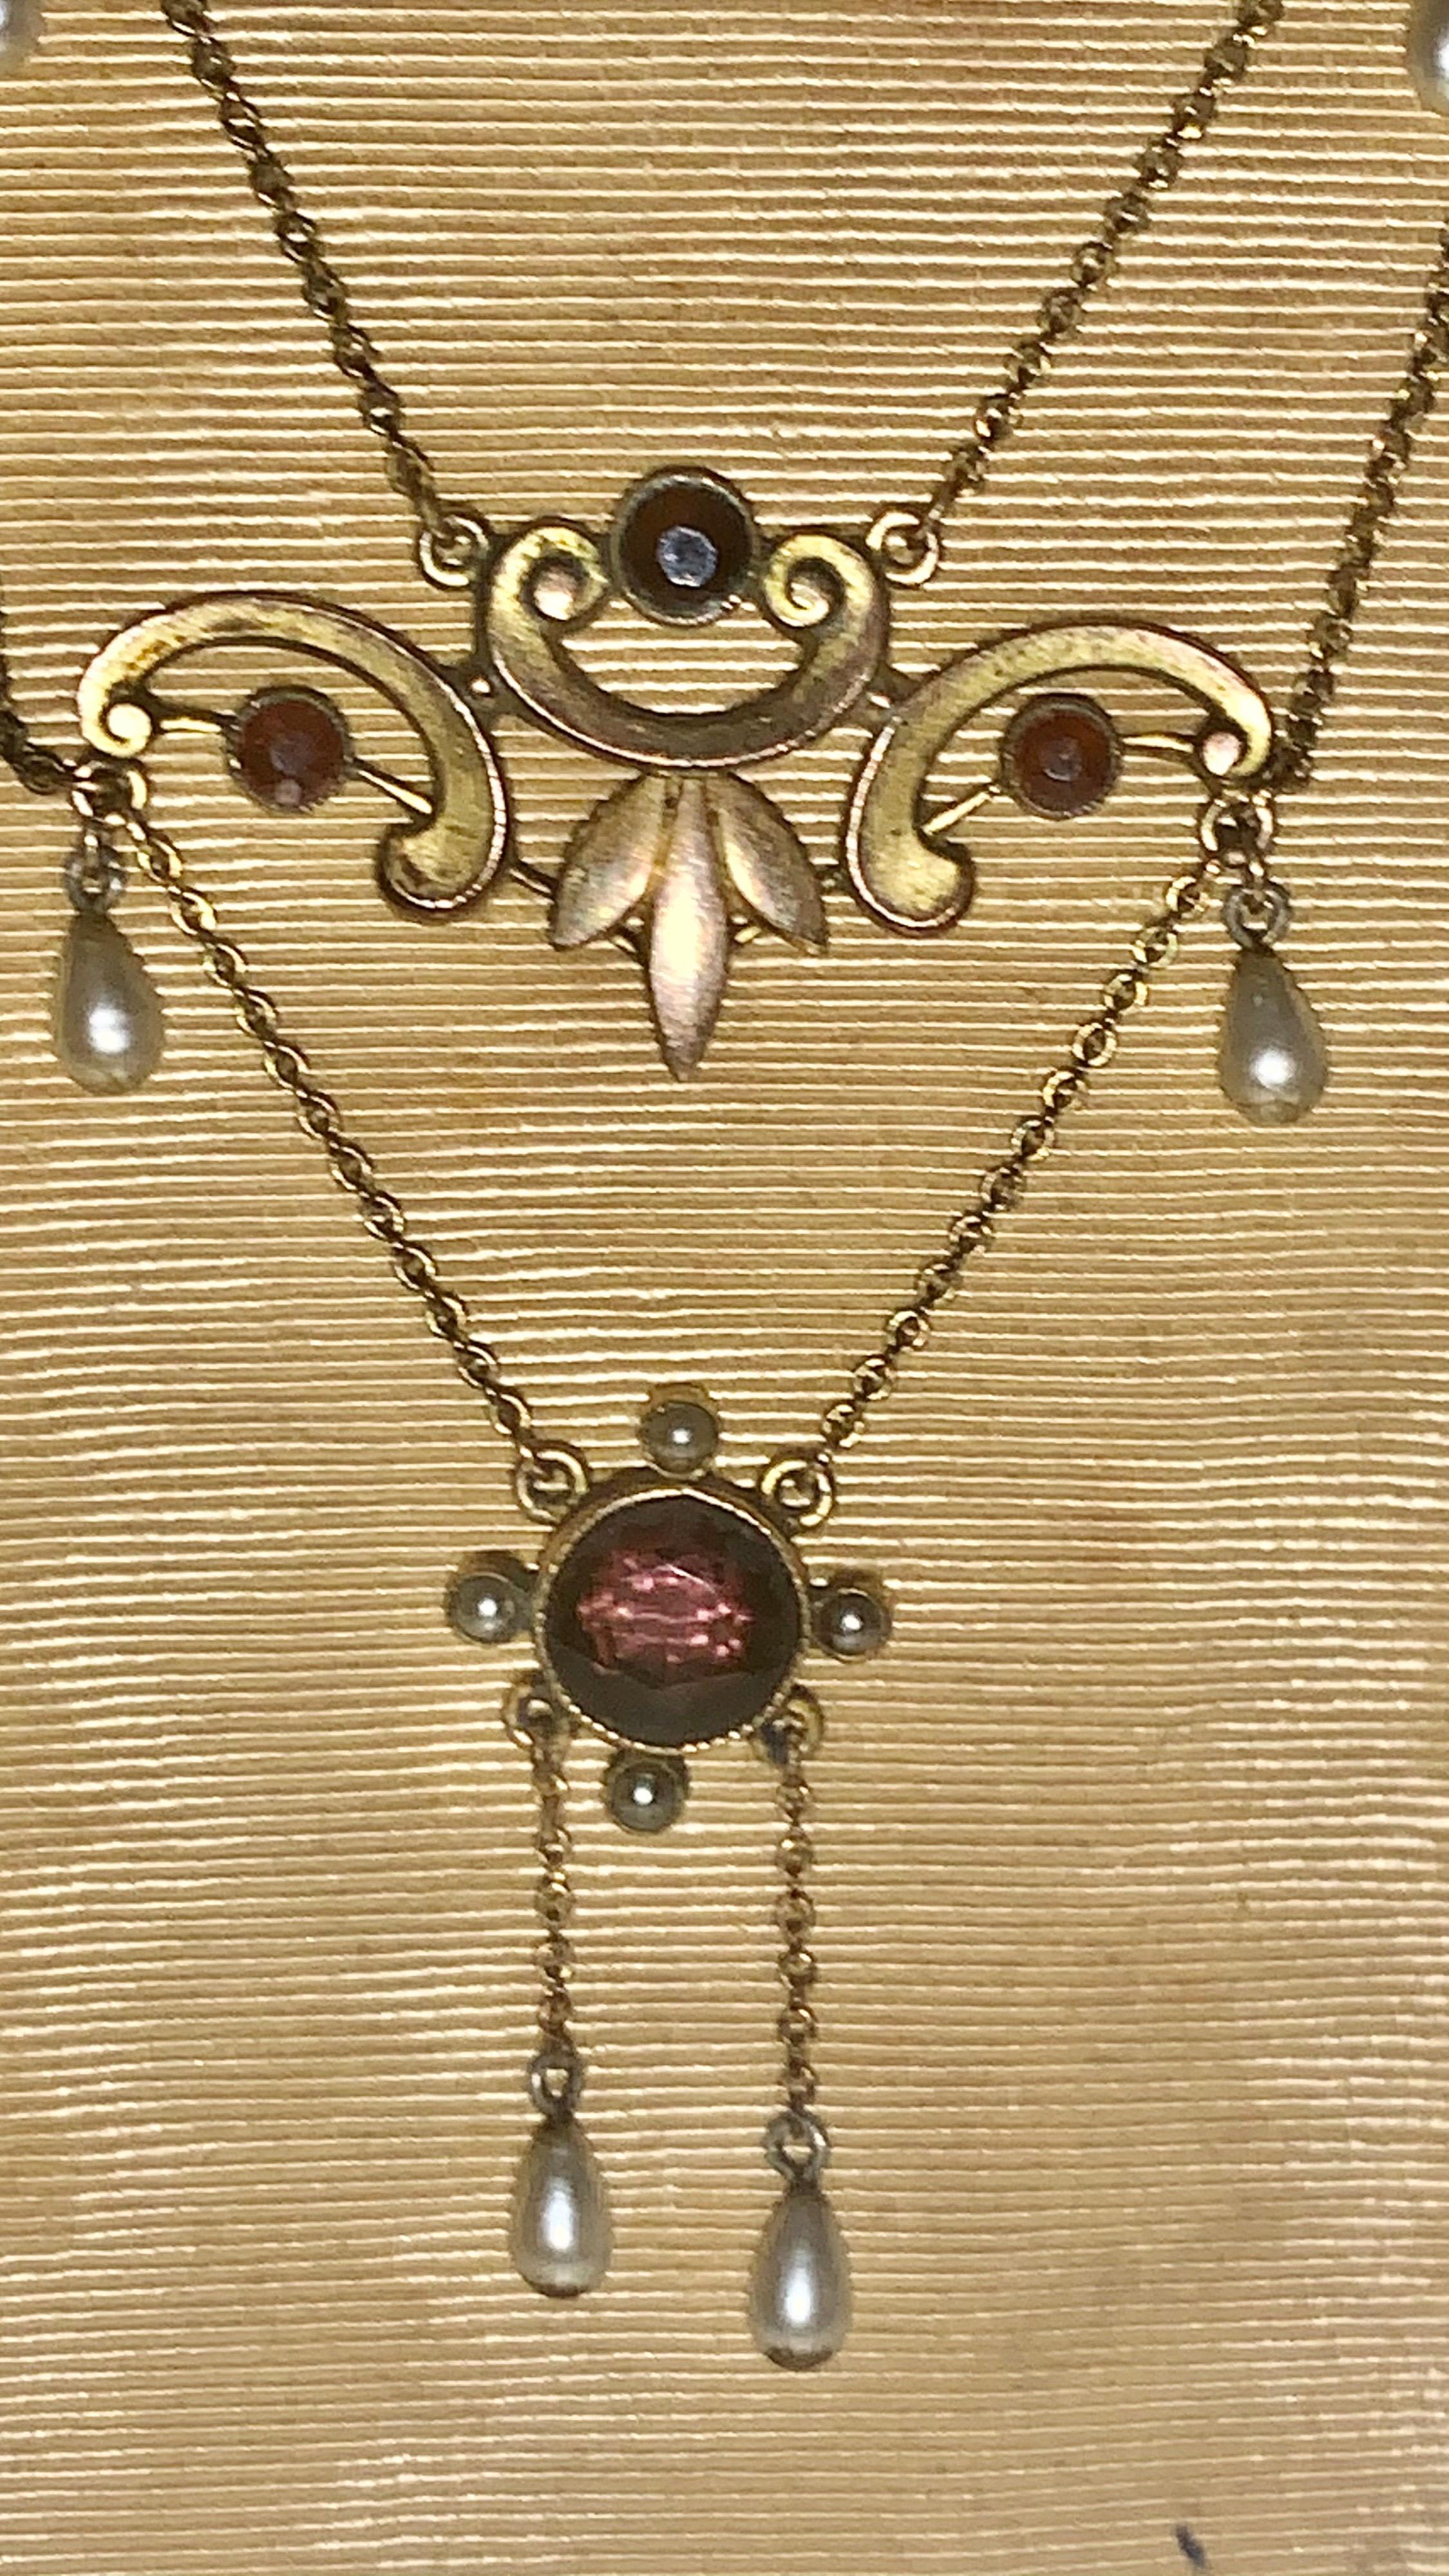 This superb Victorian Amethyst and pearl gold necklace was handcrafted in England around 1880. A very interesting design with six moving pearl dangles. A large Amethyst Centre stone weighing 1.6 carats and the others weigh 0.60 carats total.
The